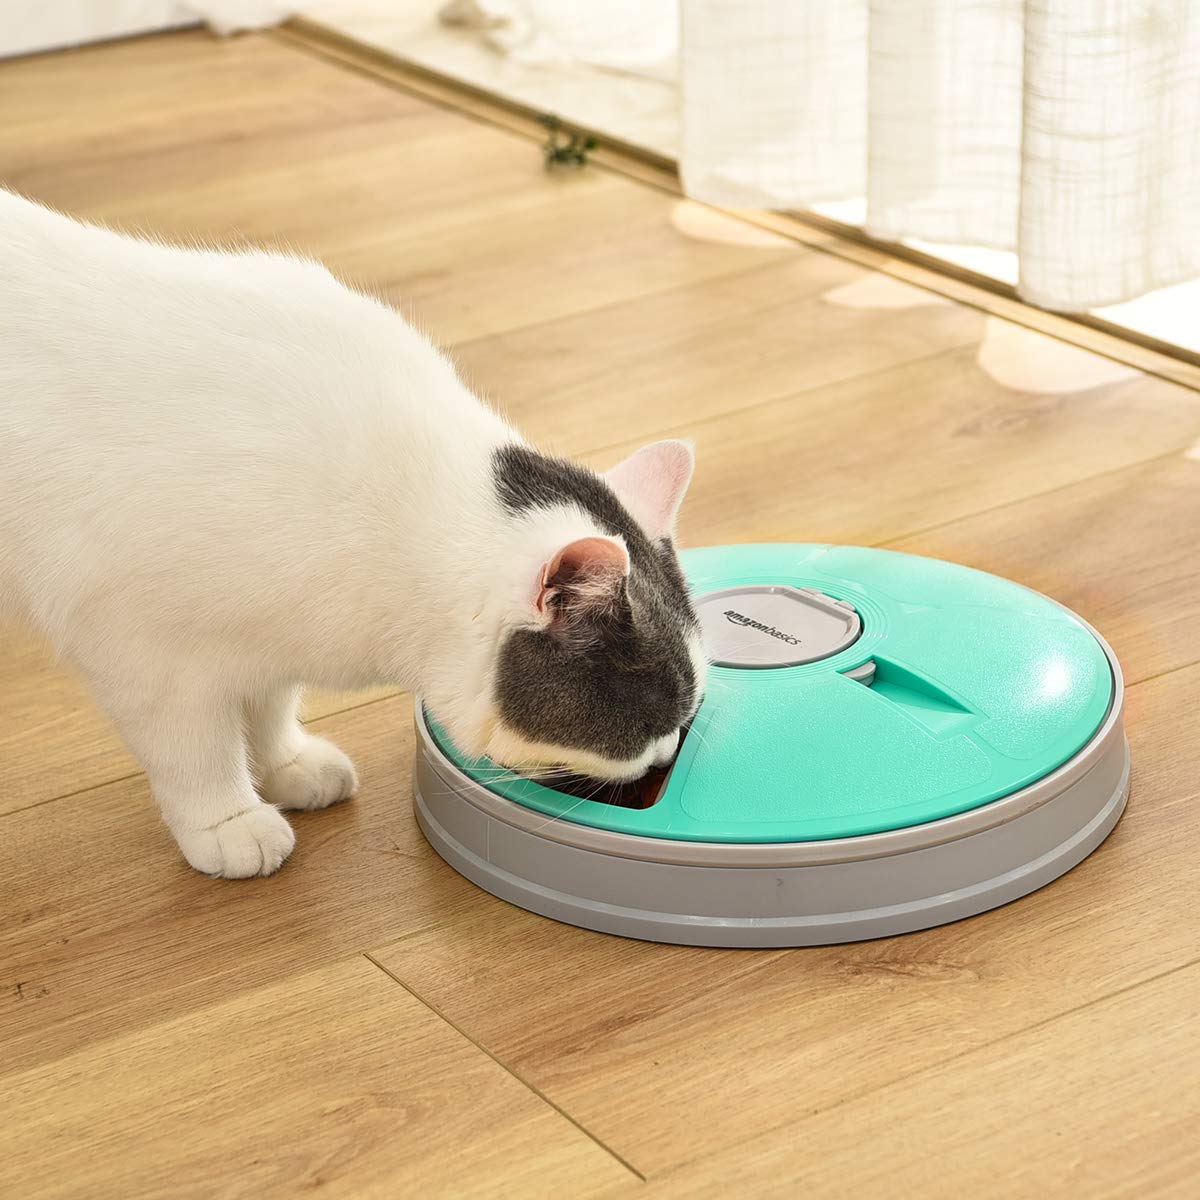 Amazon Basics Automatic Electronic Timed Pet Feeder - 6 Portions, Plastic, Teal